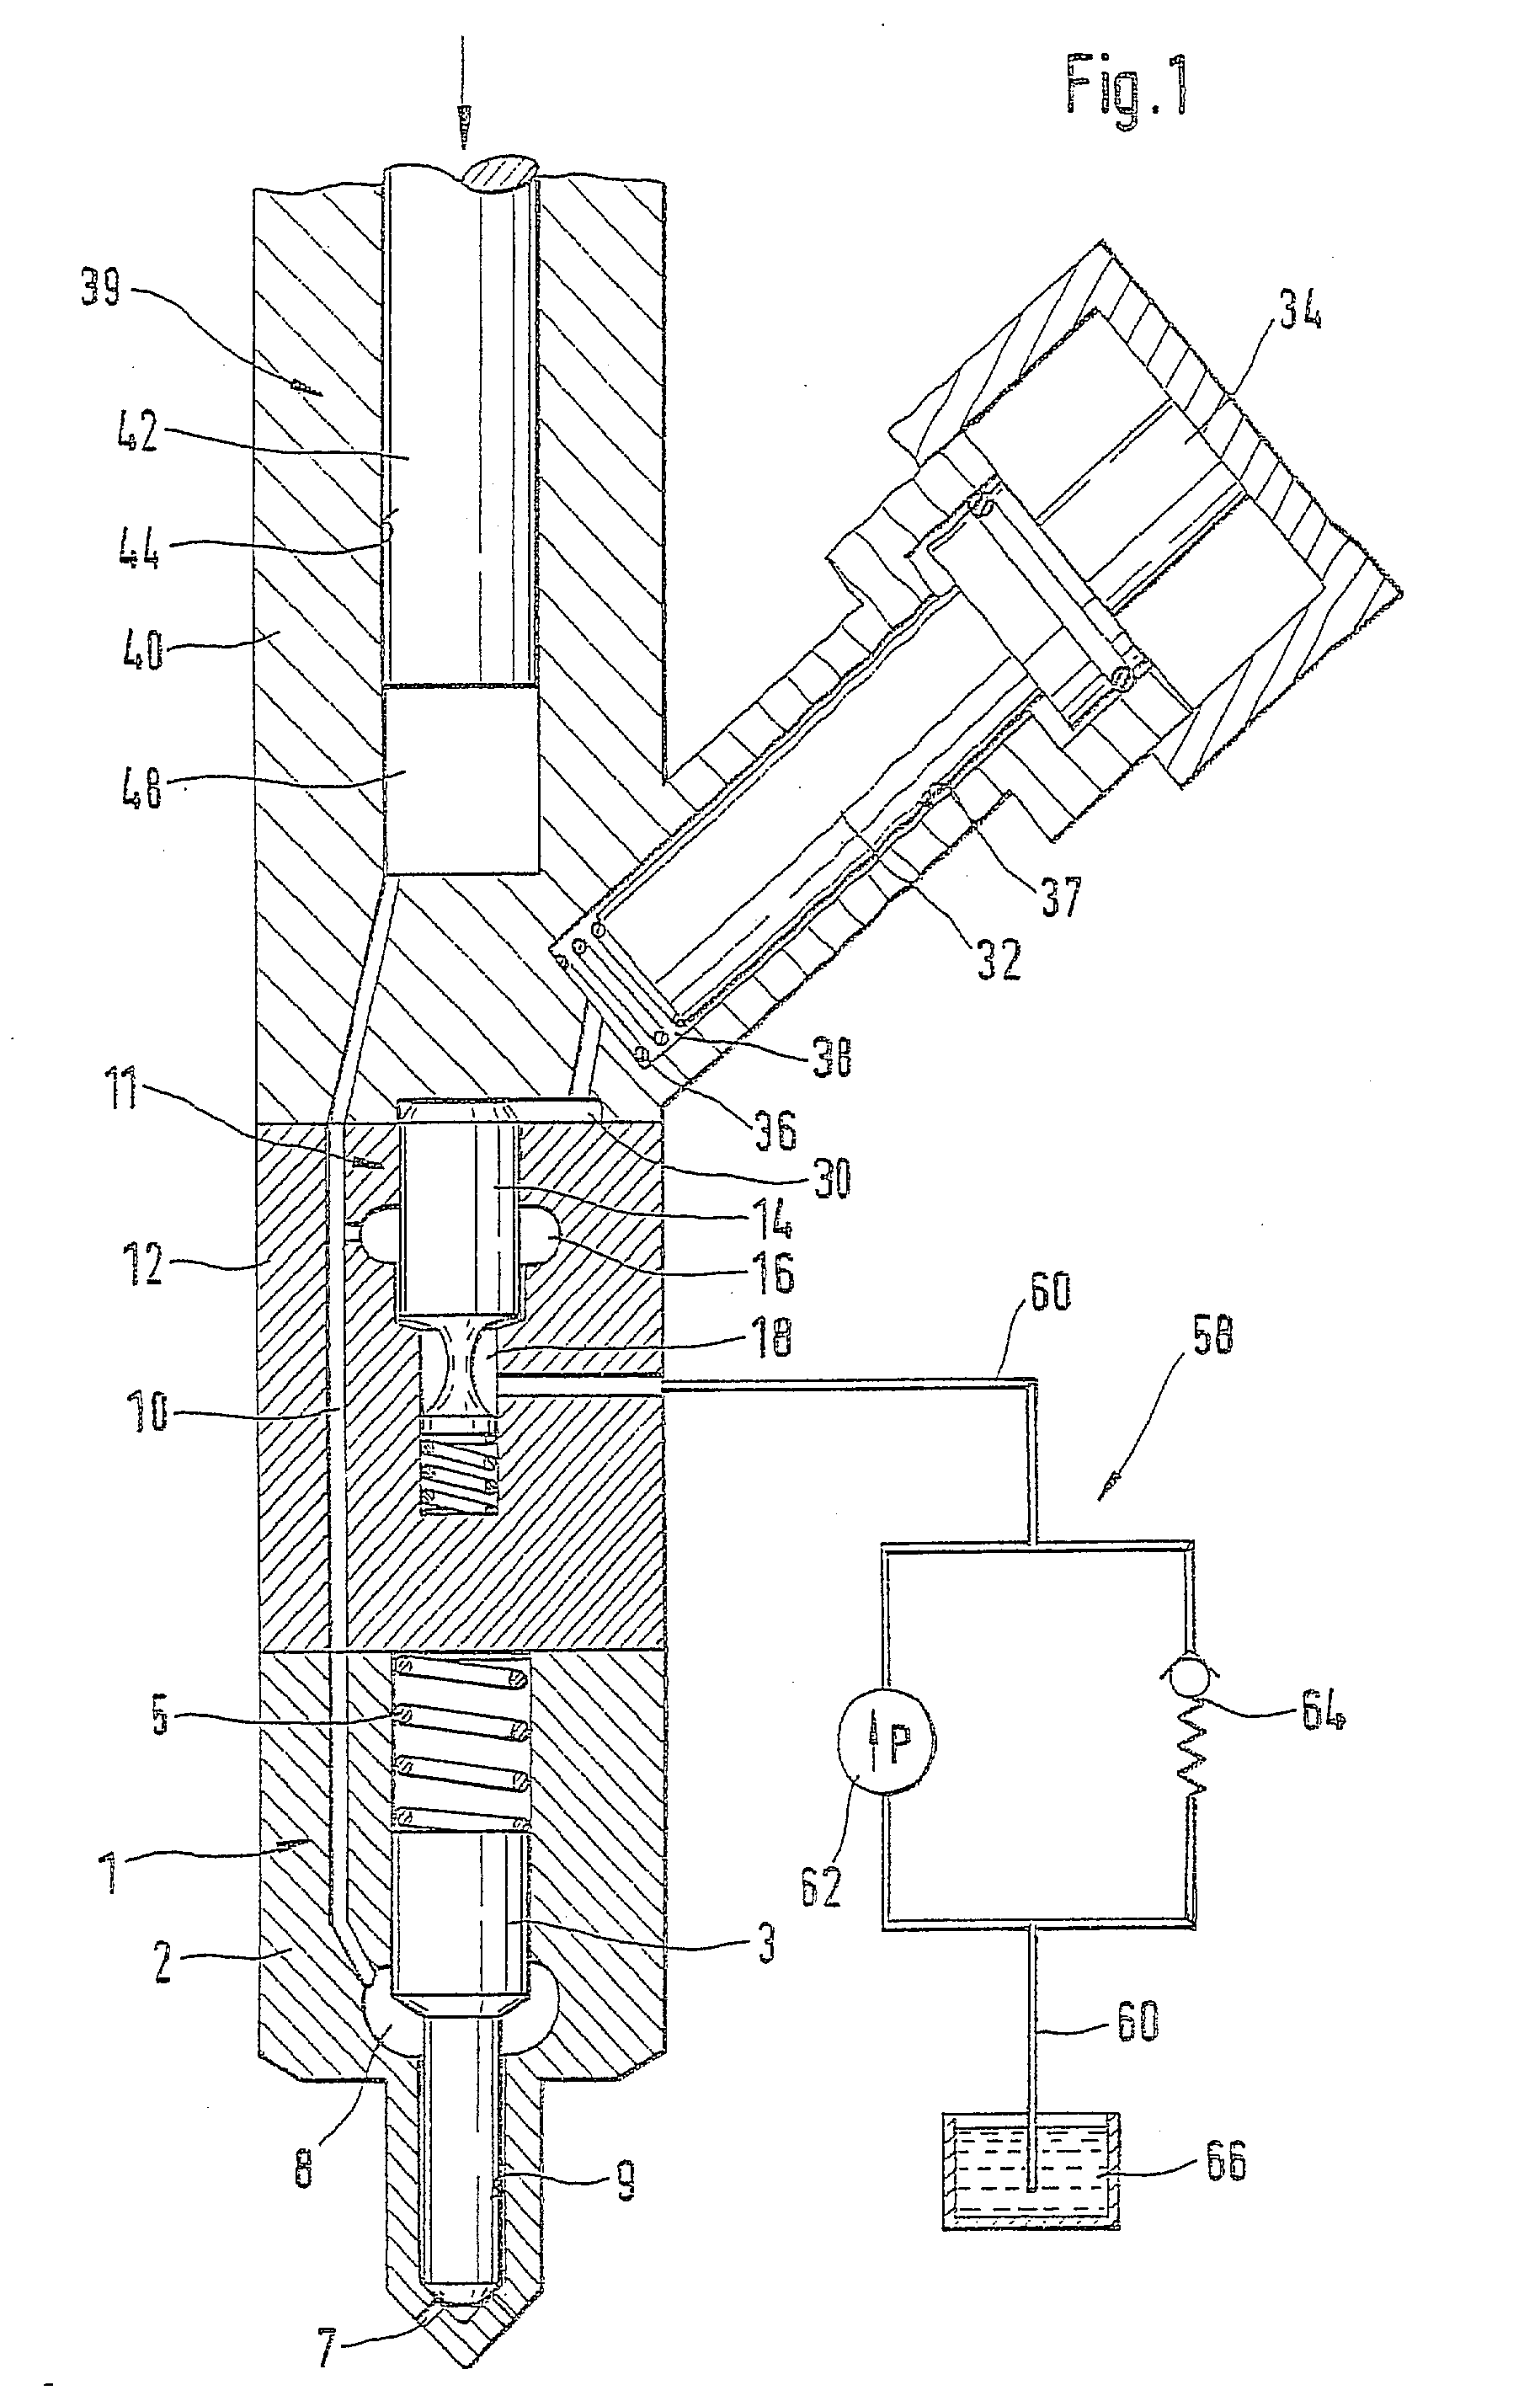 Fuel injection apparatus for an internal combustion engine